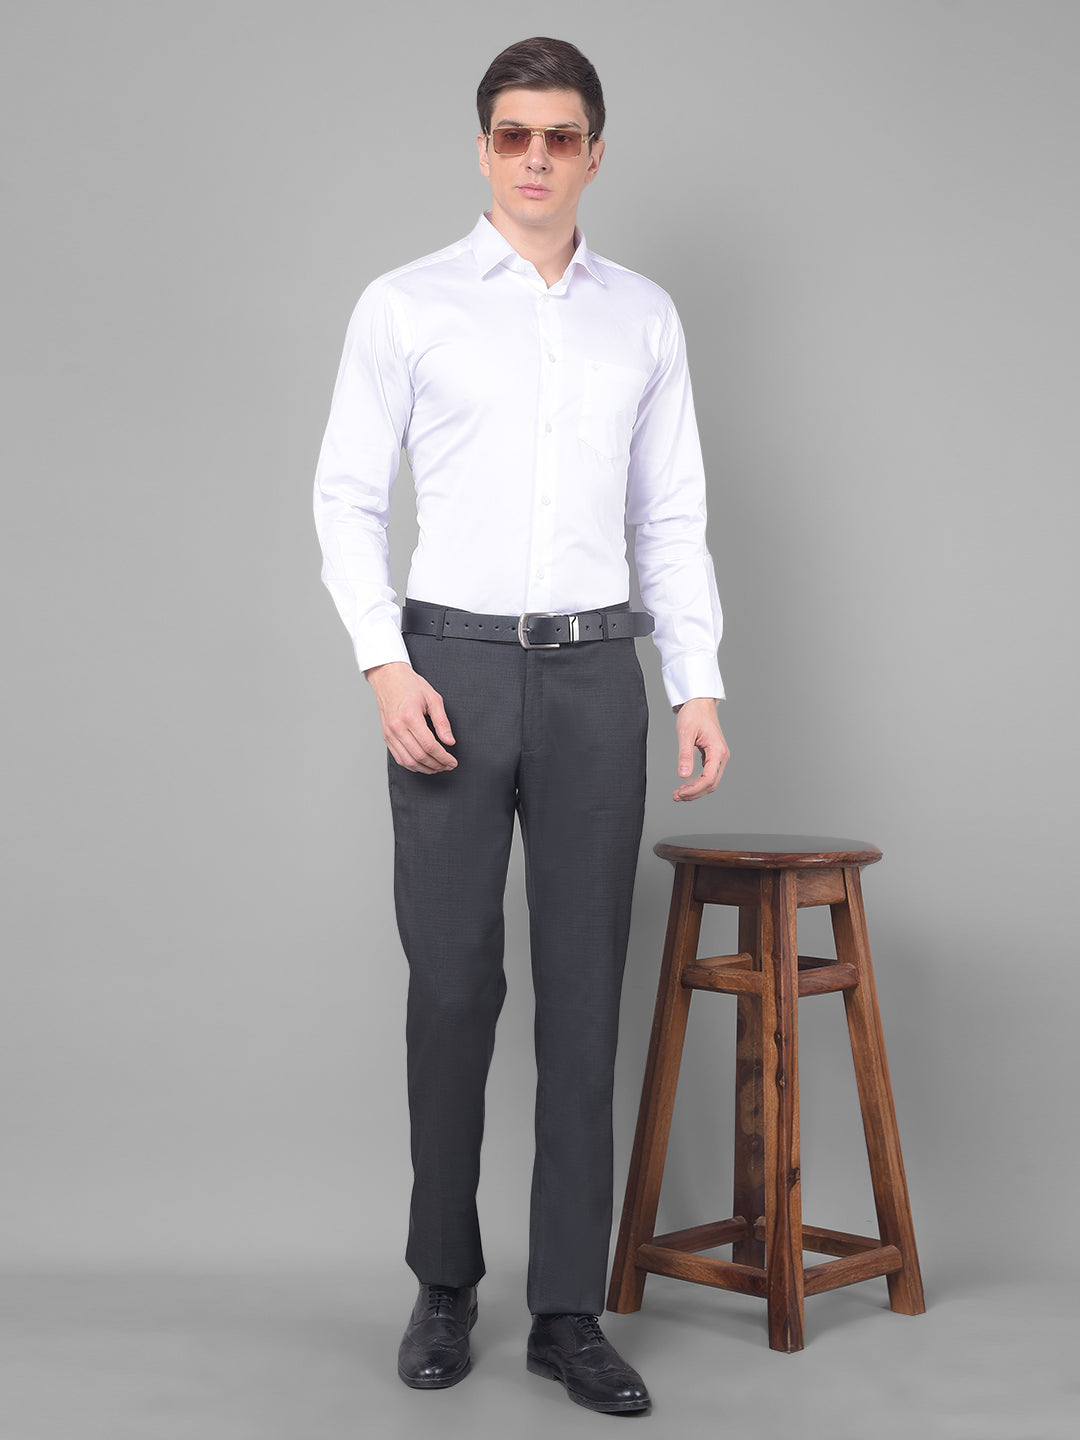 Refined Elegance Meets Unparalleled Comfort with our Cobb Dark Grey Ultra  Fit Formal Trouser